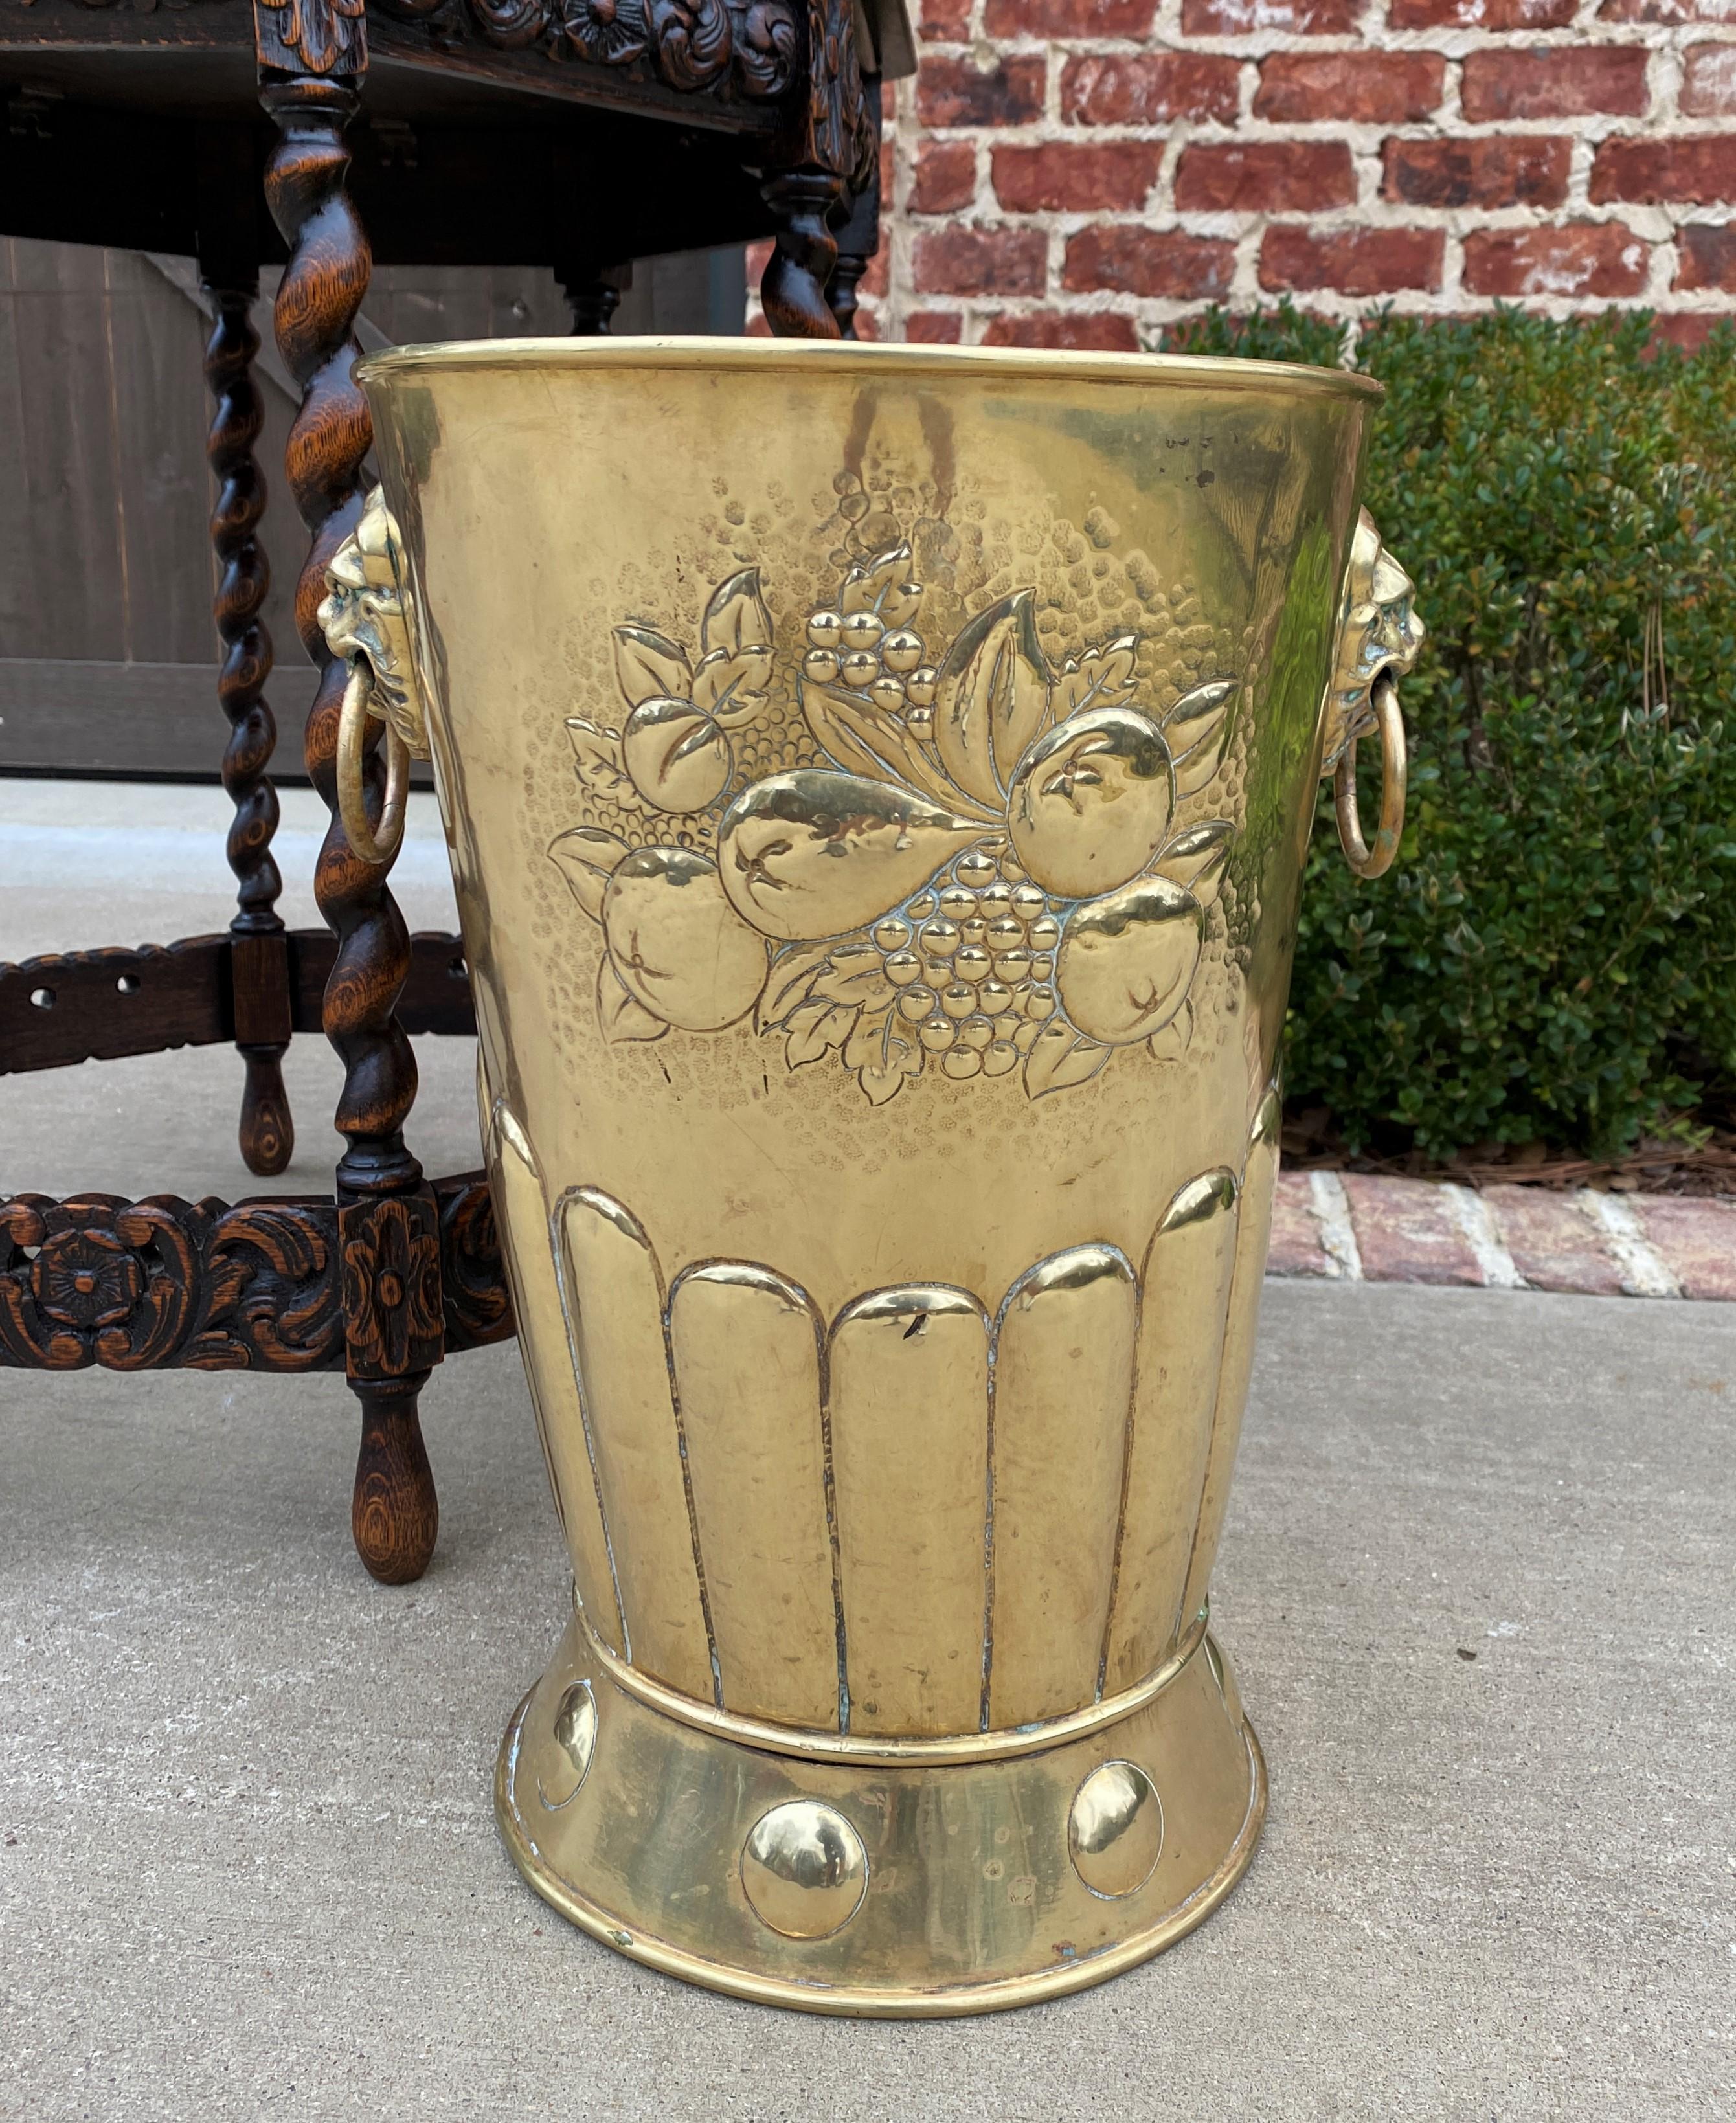 Antique English BRASS Umbrella Stand, Cane or Stick Stand~~c. 1920s

Charming antique English freshly polished and hand-seamed BRASS umbrella stand~~perfect for a entry hall or mudroom for umbrellas or canes~~use it as a decorative piece in a game